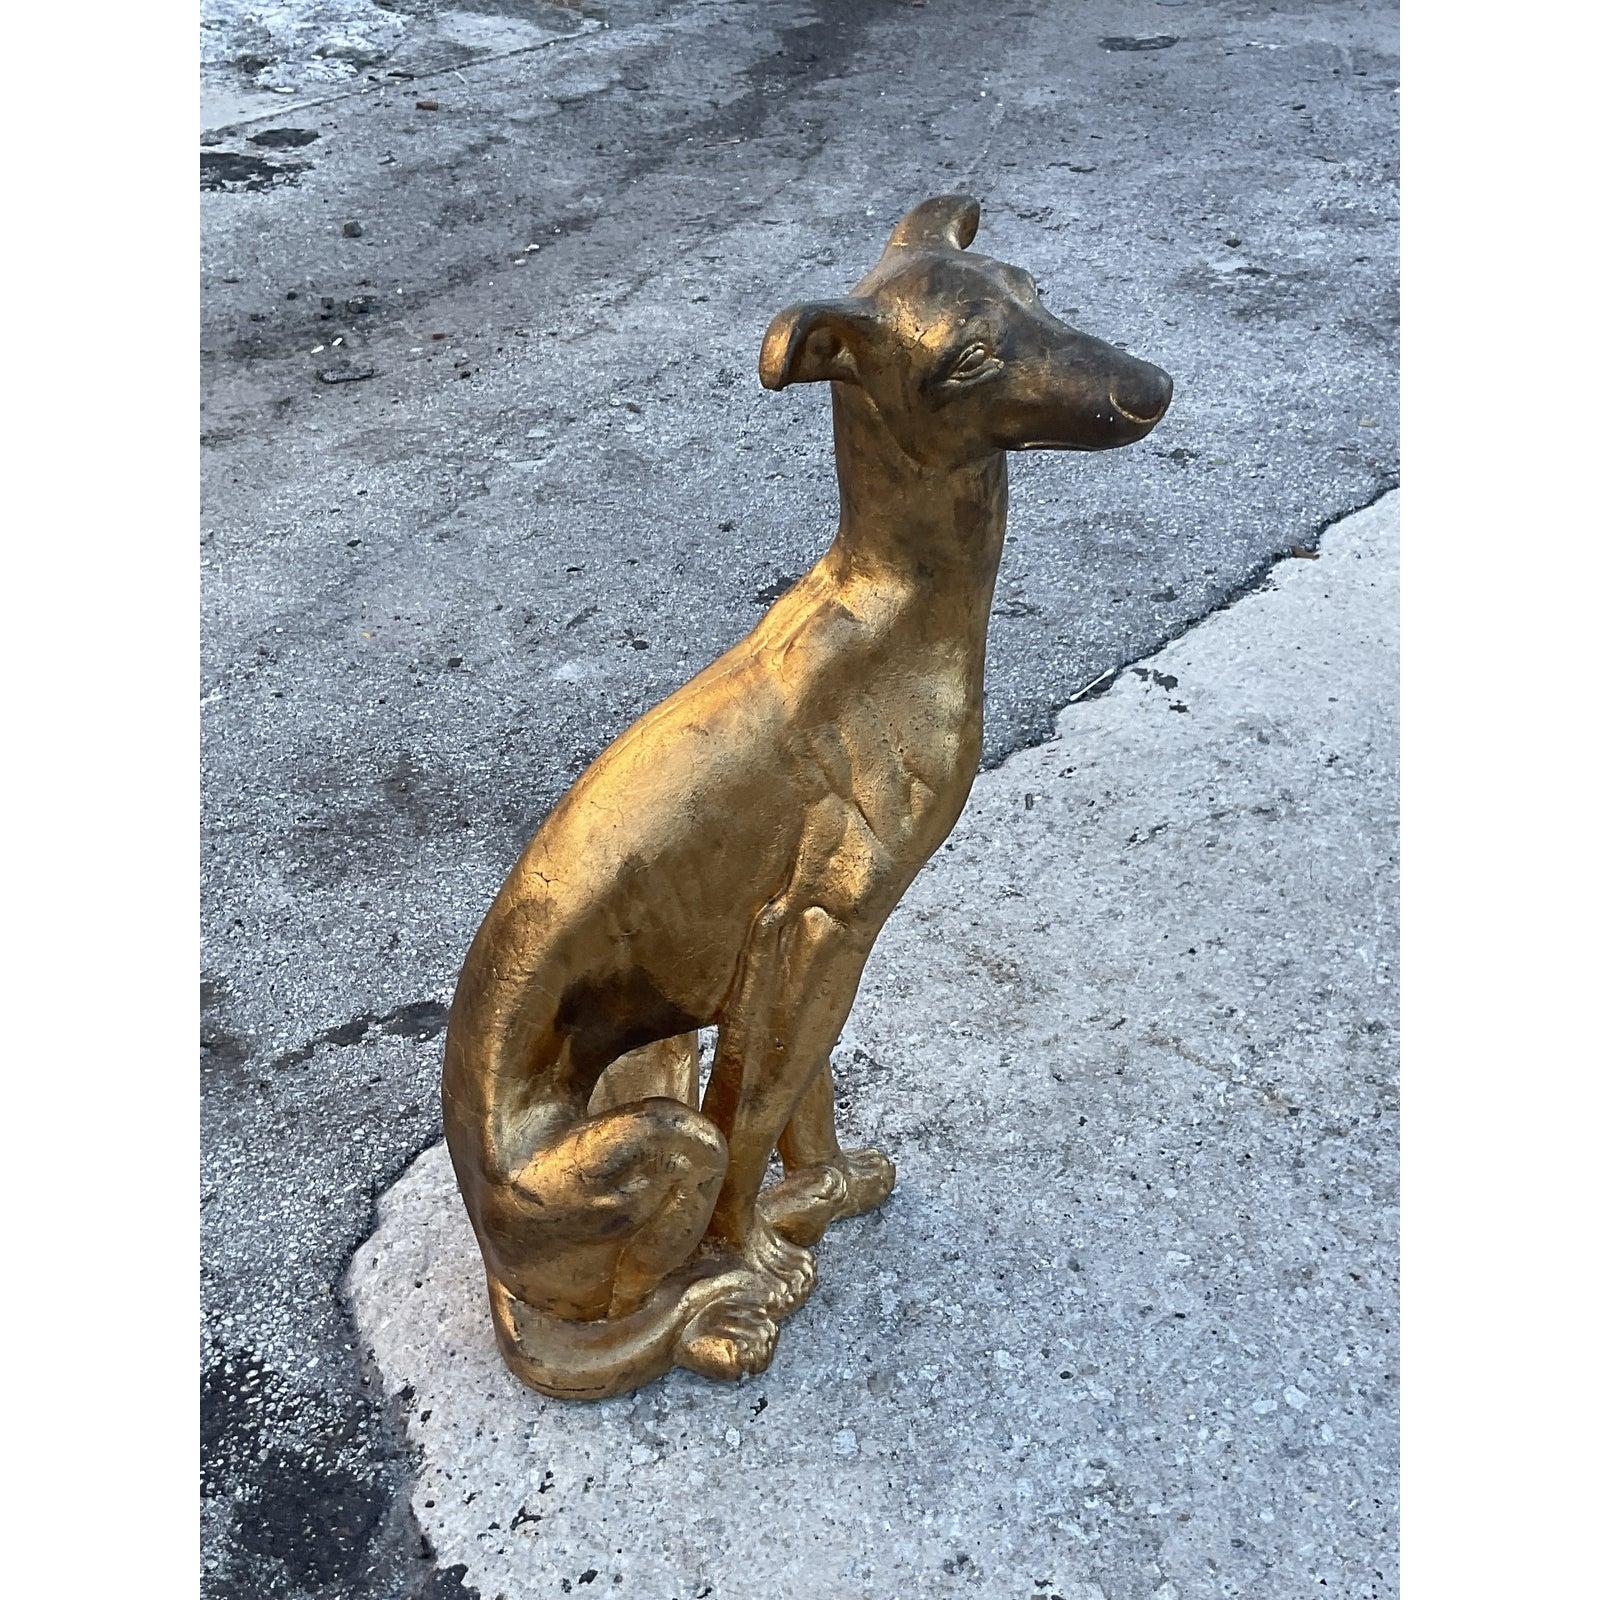 Fantastic vintage life size cement dog. A chic gold finish with a warm patina of time. A dramatic addition inside or outdoors. Acquired from a Palm Beach estate.